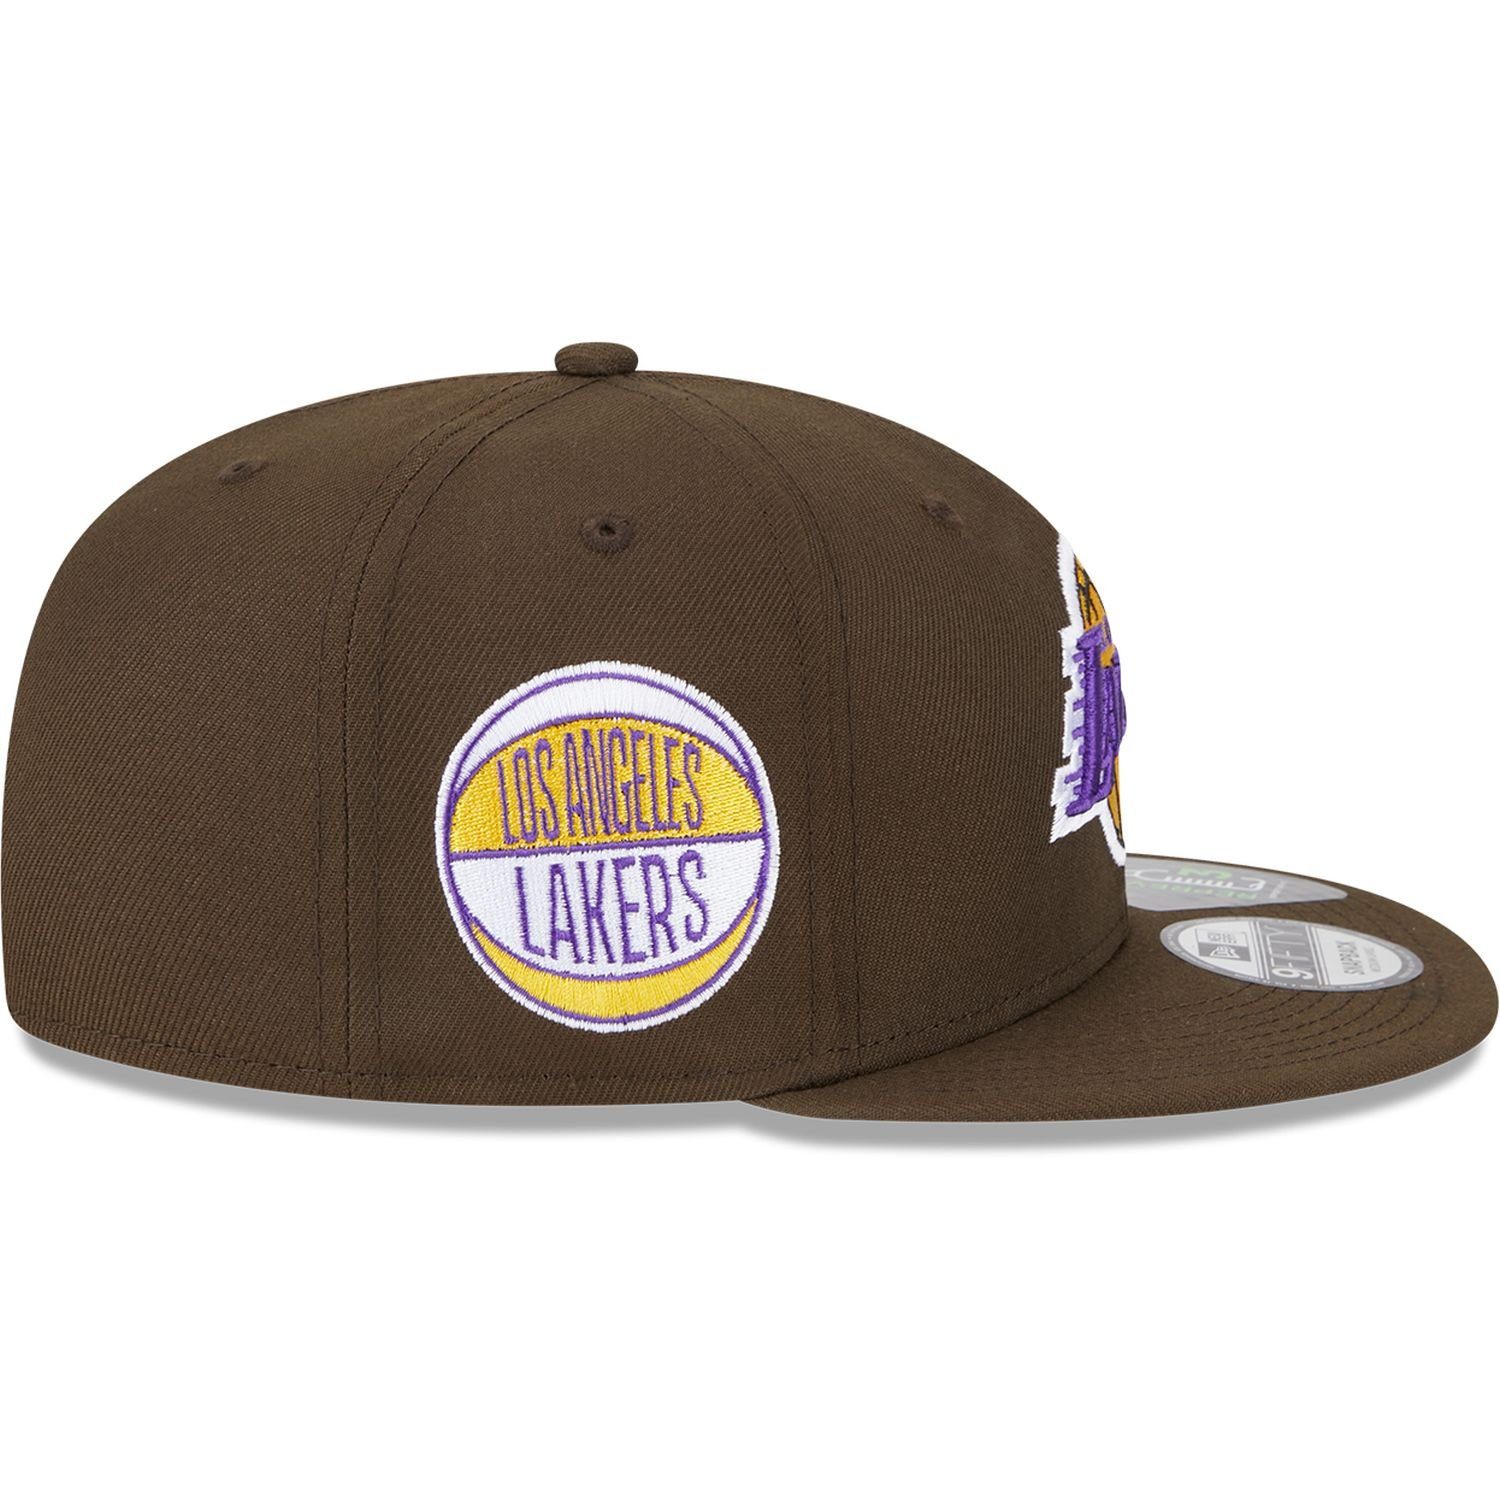 Los Era Snapback Angeles Cap New Lakers 9Fifty SIDEPATCH